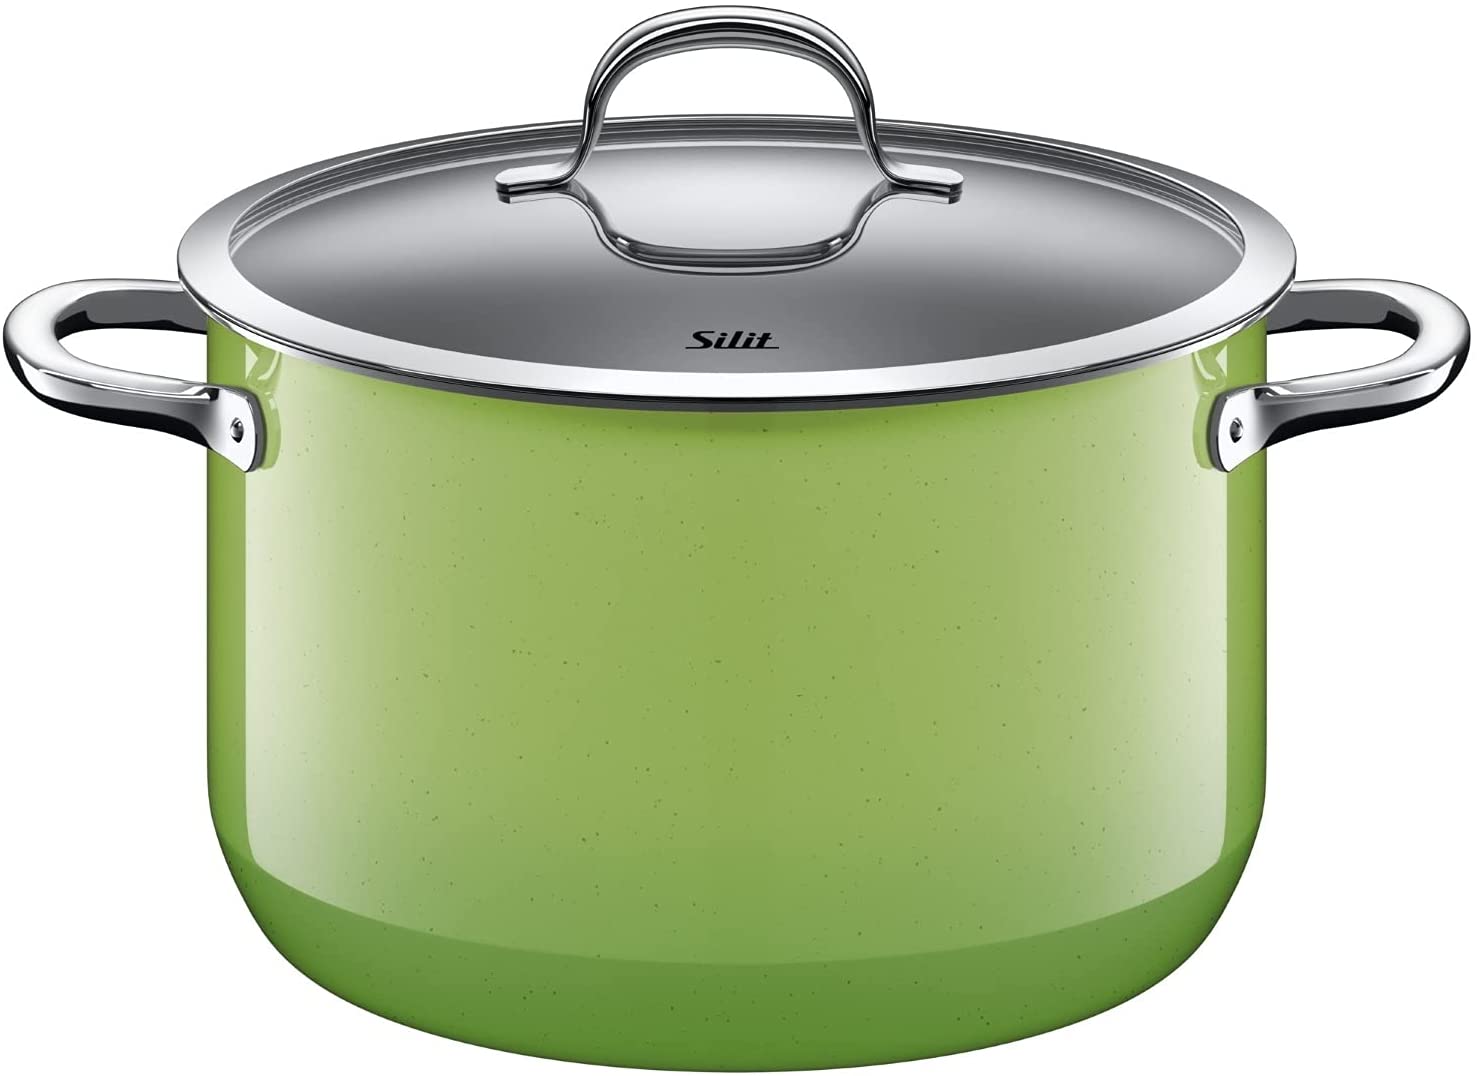 Silit 2102299202 Passion Tall Cooking Pot Diameter 24 cm 6.4 Litre Pouring Rim Ring Handle Glass Lid Silargan Function Ceramic Suitable for Induction Cookers Dishwasher Safe Green Enamel